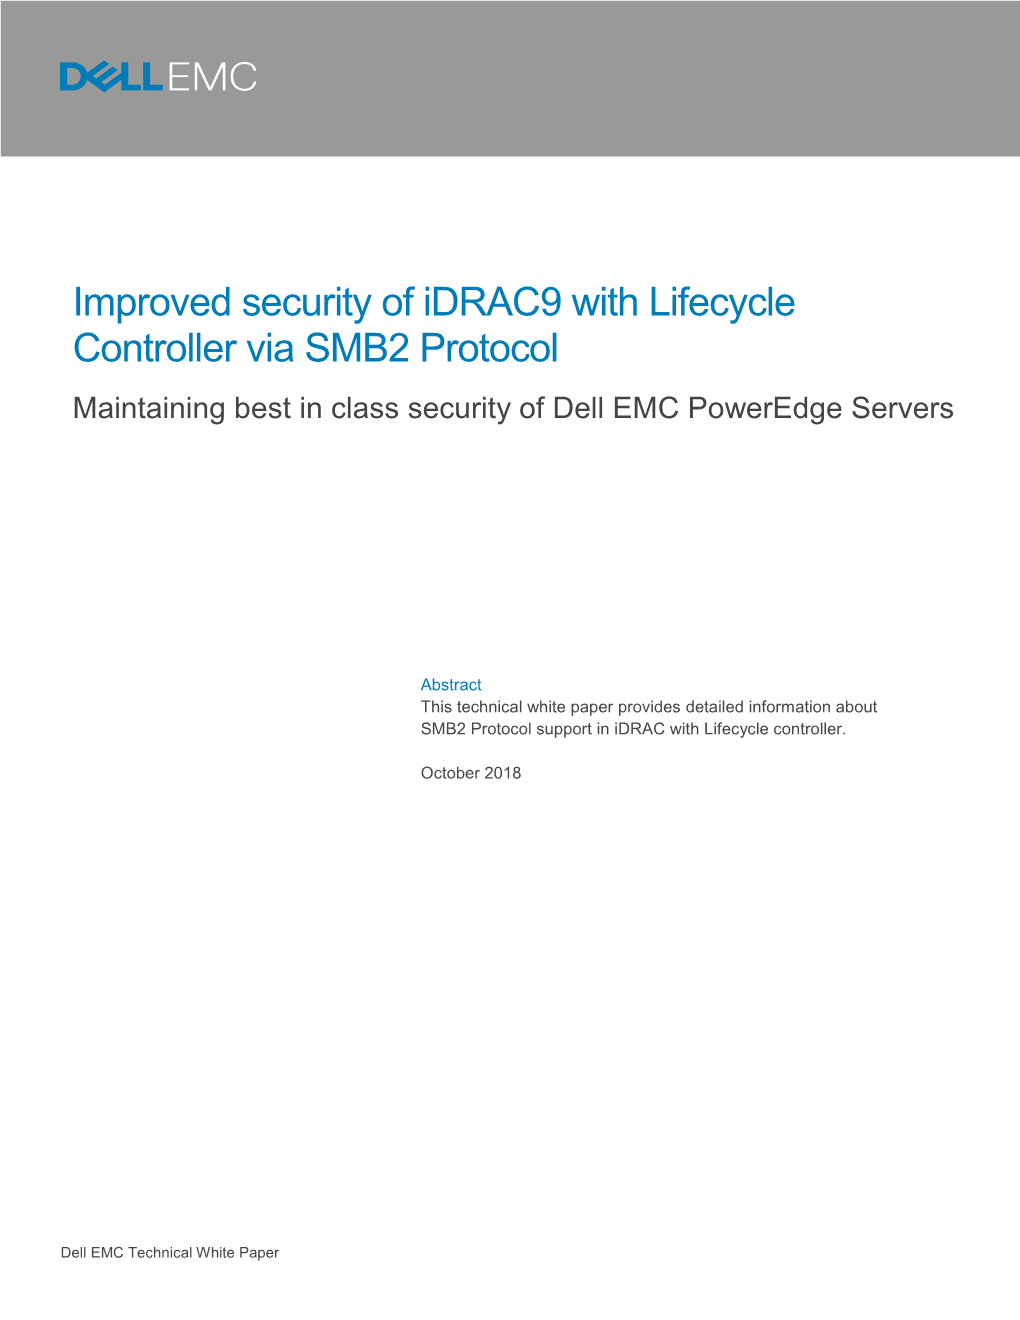 Improved Security of Idrac9 with Lifecycle Controller Via SMB2 Protocol Maintaining Best in Class Security of Dell EMC Poweredge Servers